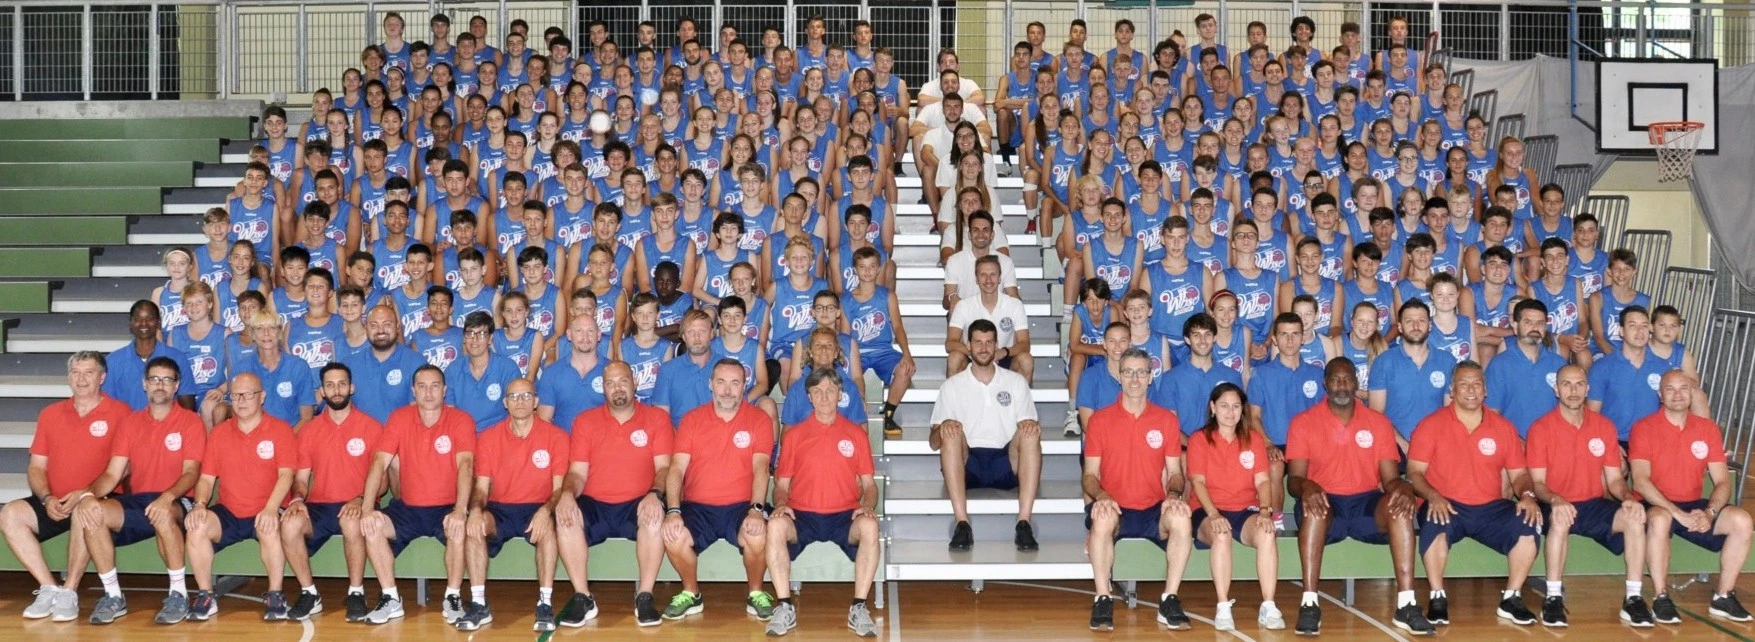 25° WBSC Supercamp 2018 International Basketball School “Claudio Papini” a magnificent edition!!